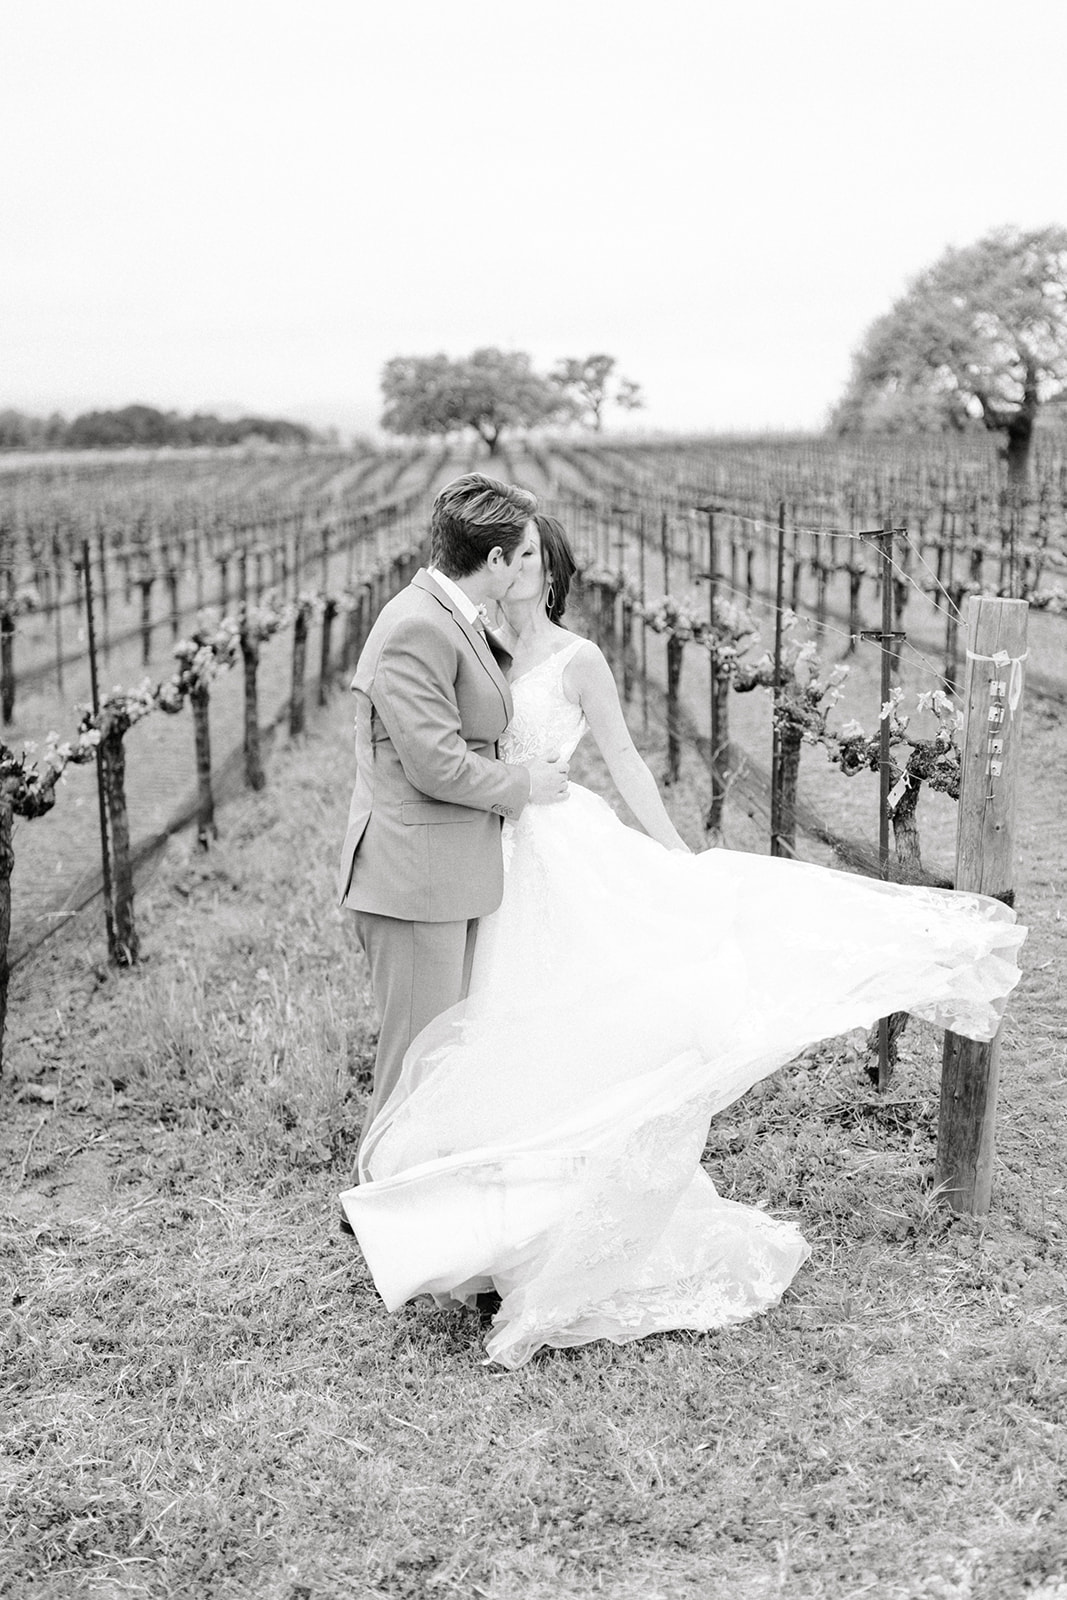 Candid luxury wedding moment at Sunstone Winery, with Southern California’s hills in the backdrop.